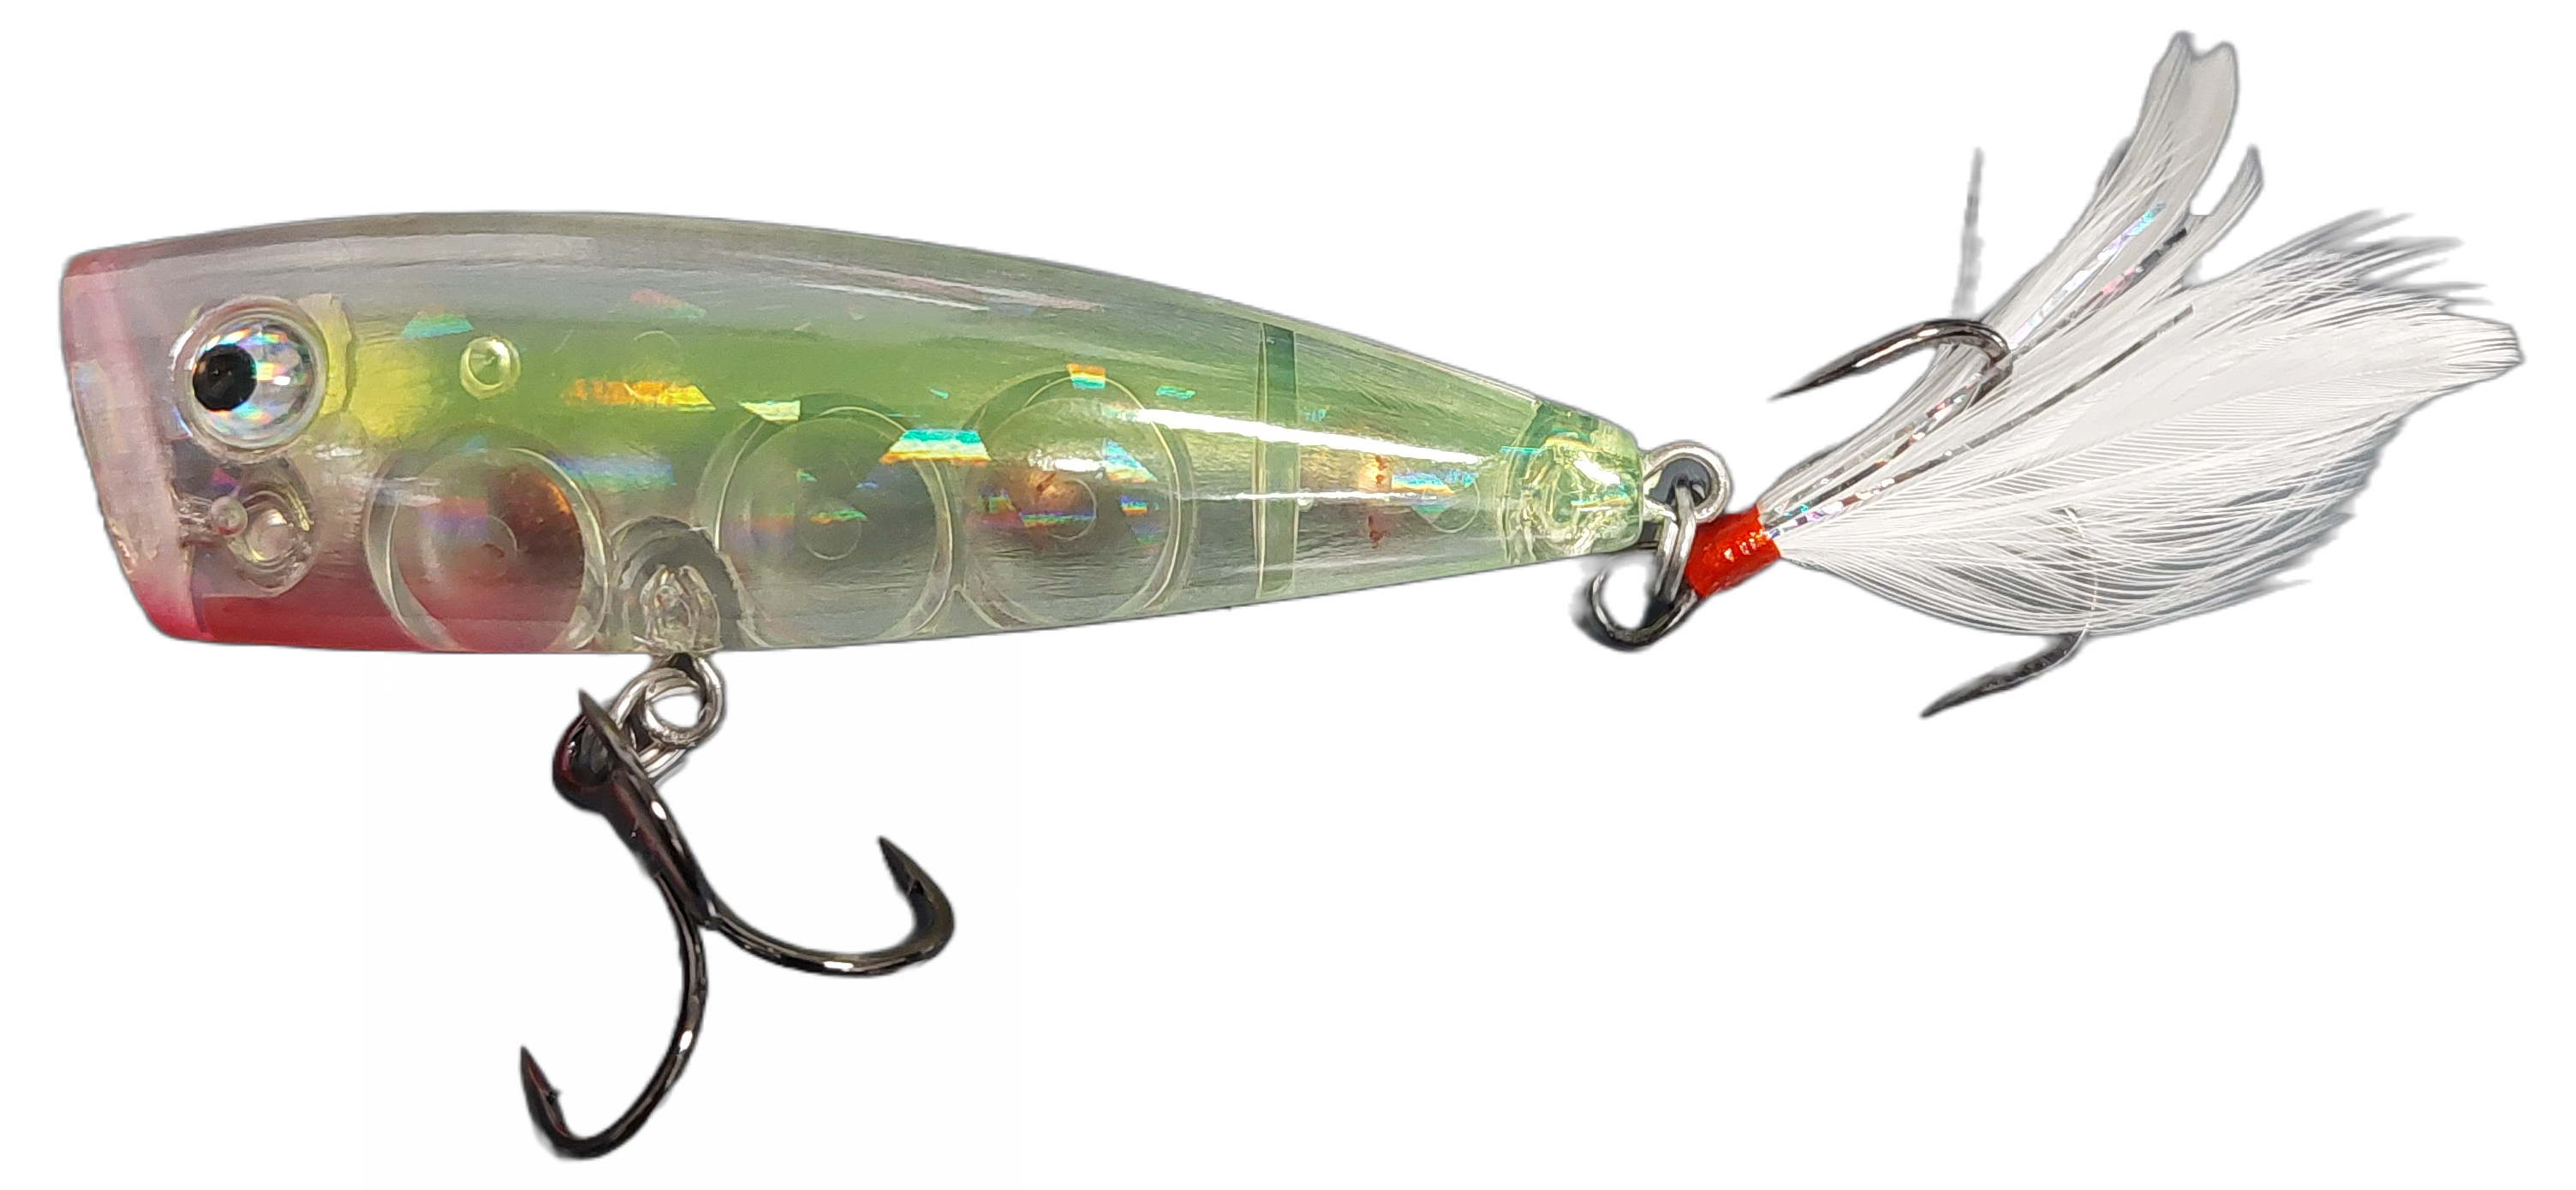 Topwater Popper Bass Fishing Lure 60mm -- 3/16 oz. Five Colors to Choose